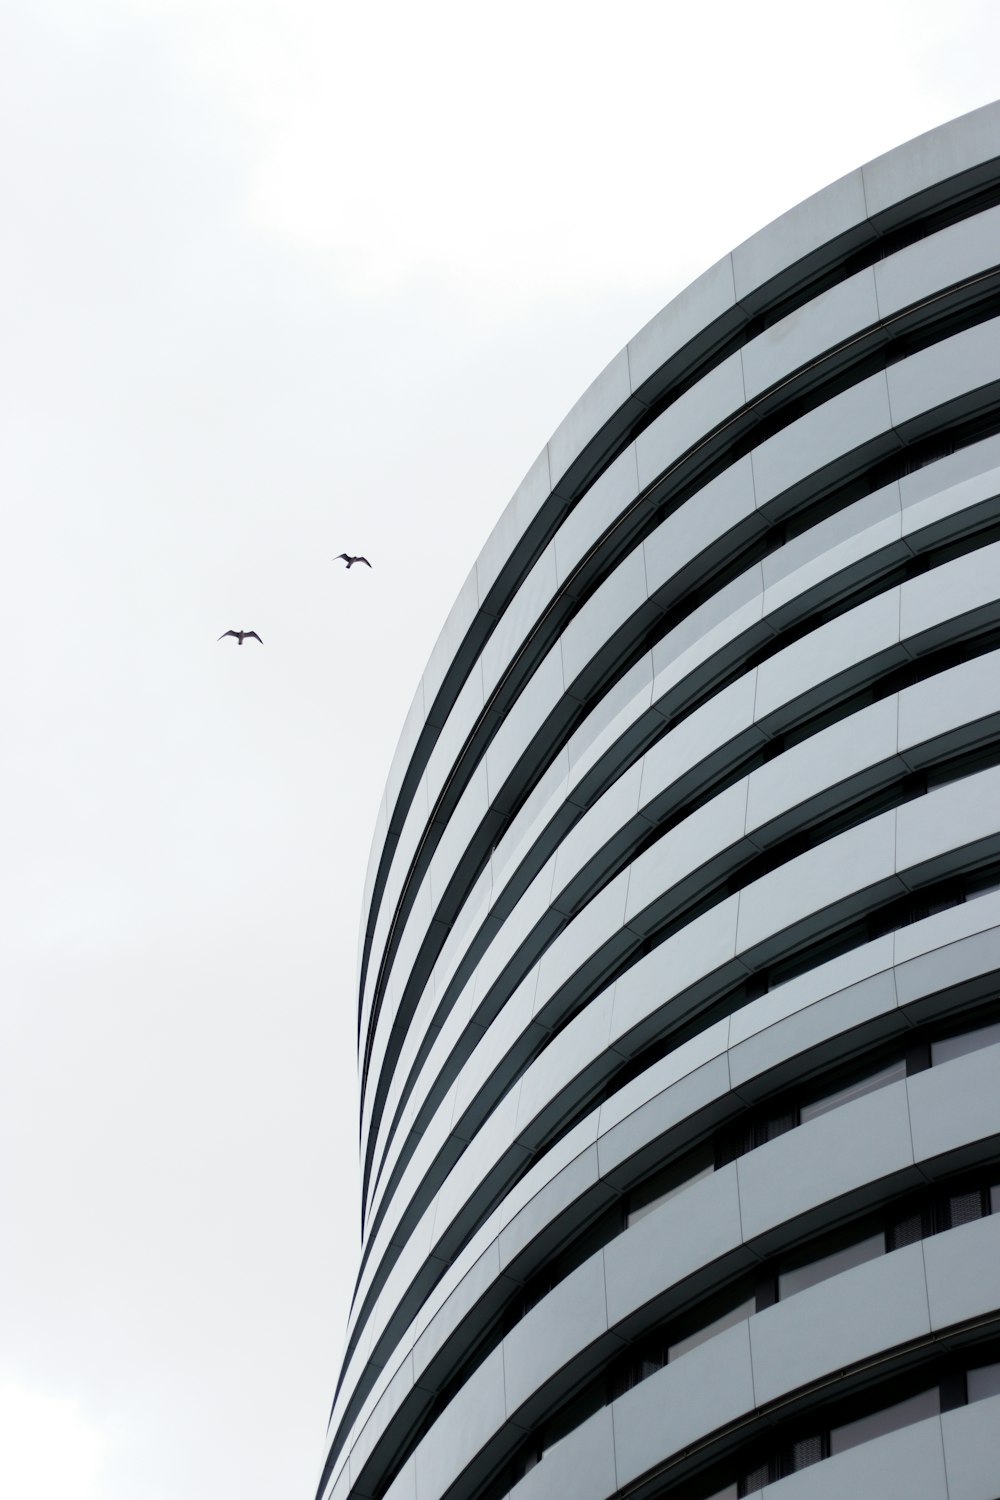 two birds flying in the sky over a building